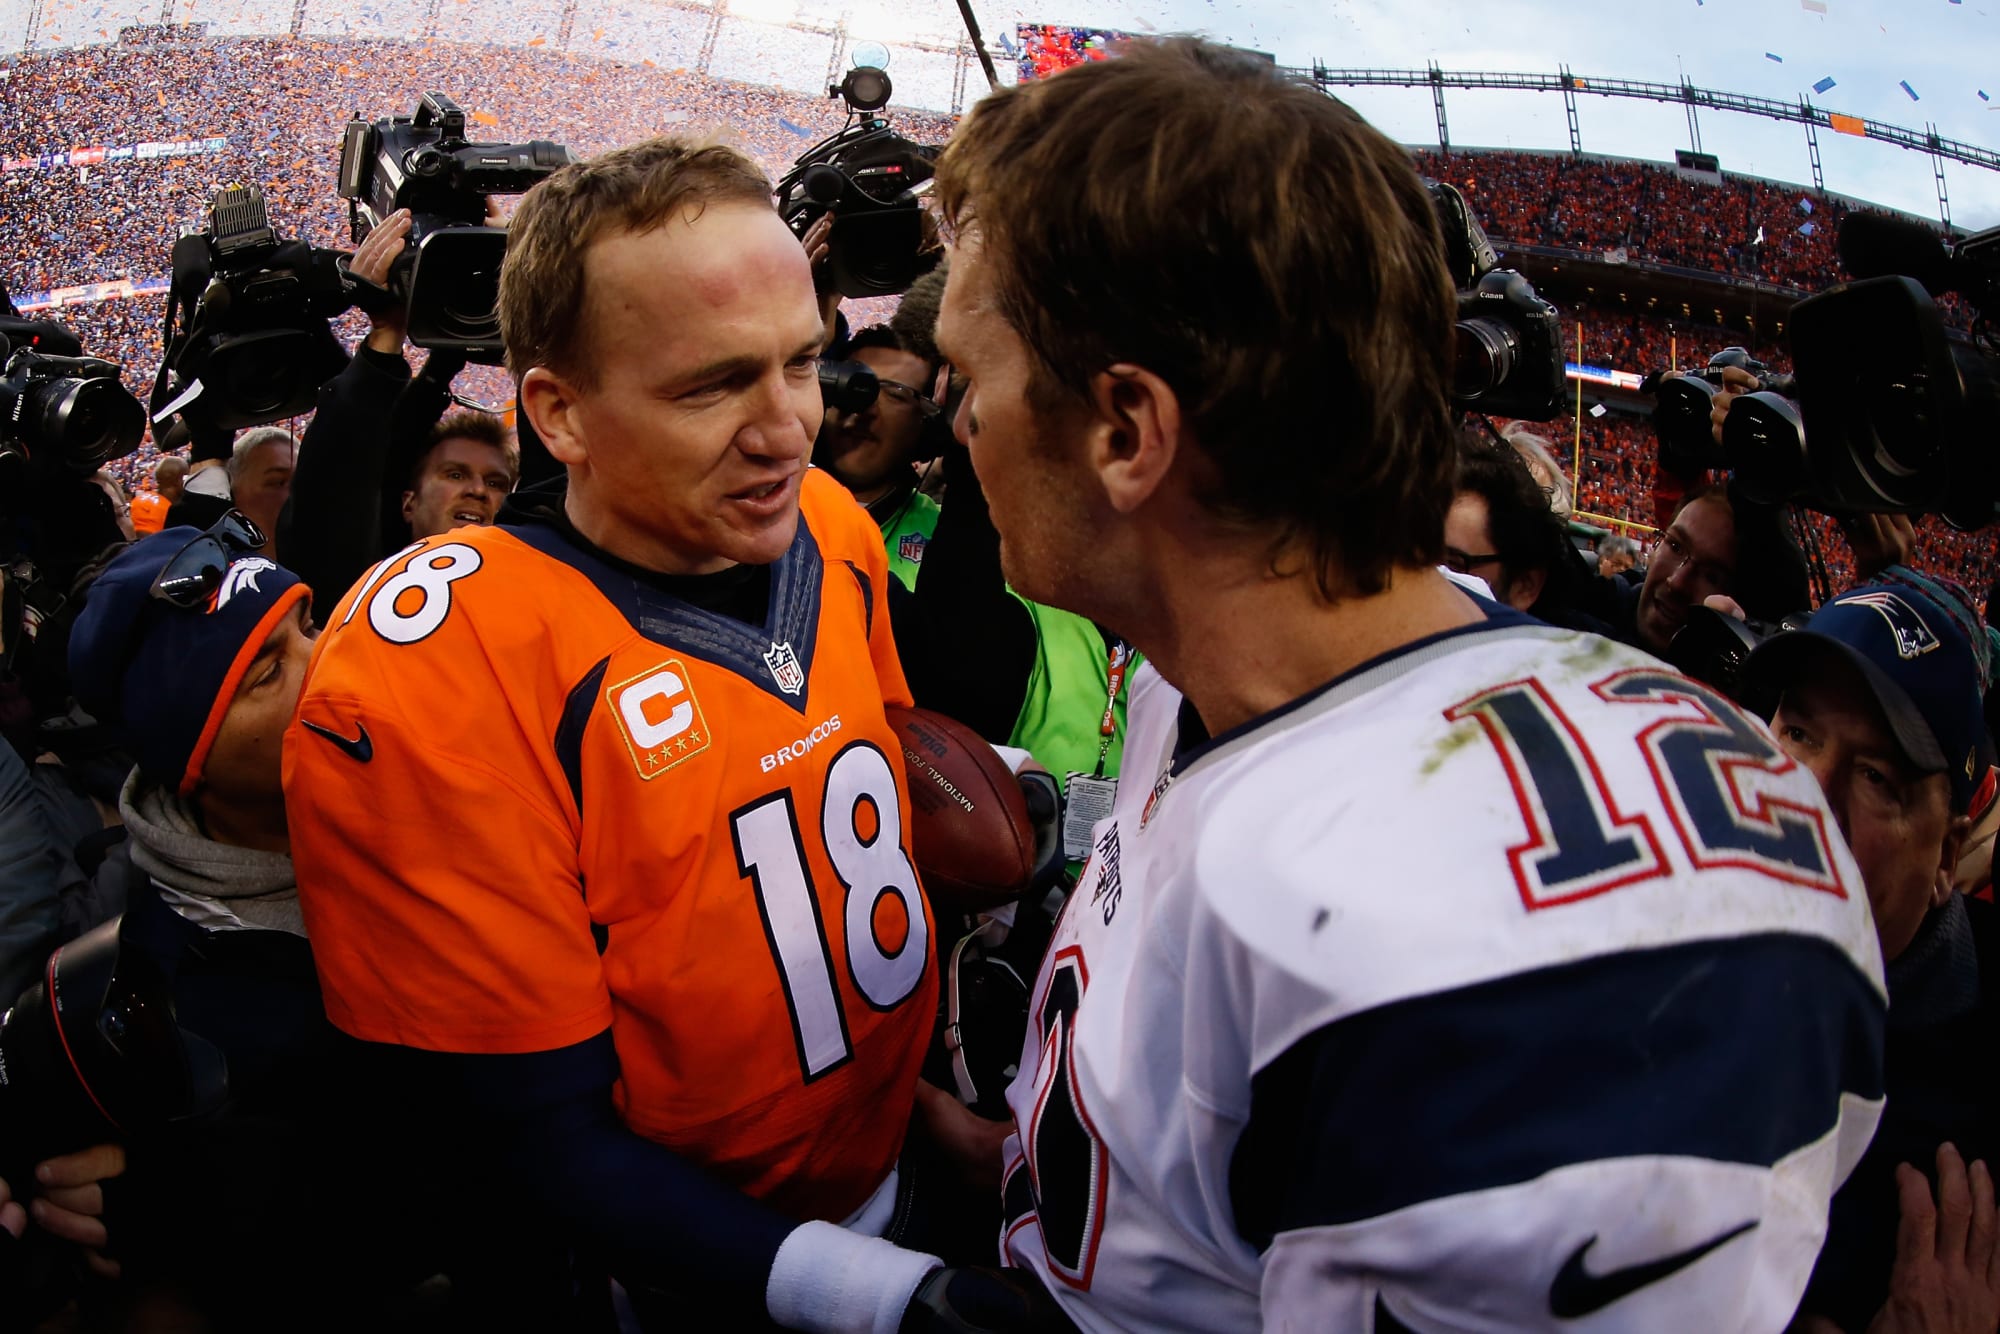 Photo of Former linebacker weighs in on scarier QB to face Peyton Manning or Tom Brady